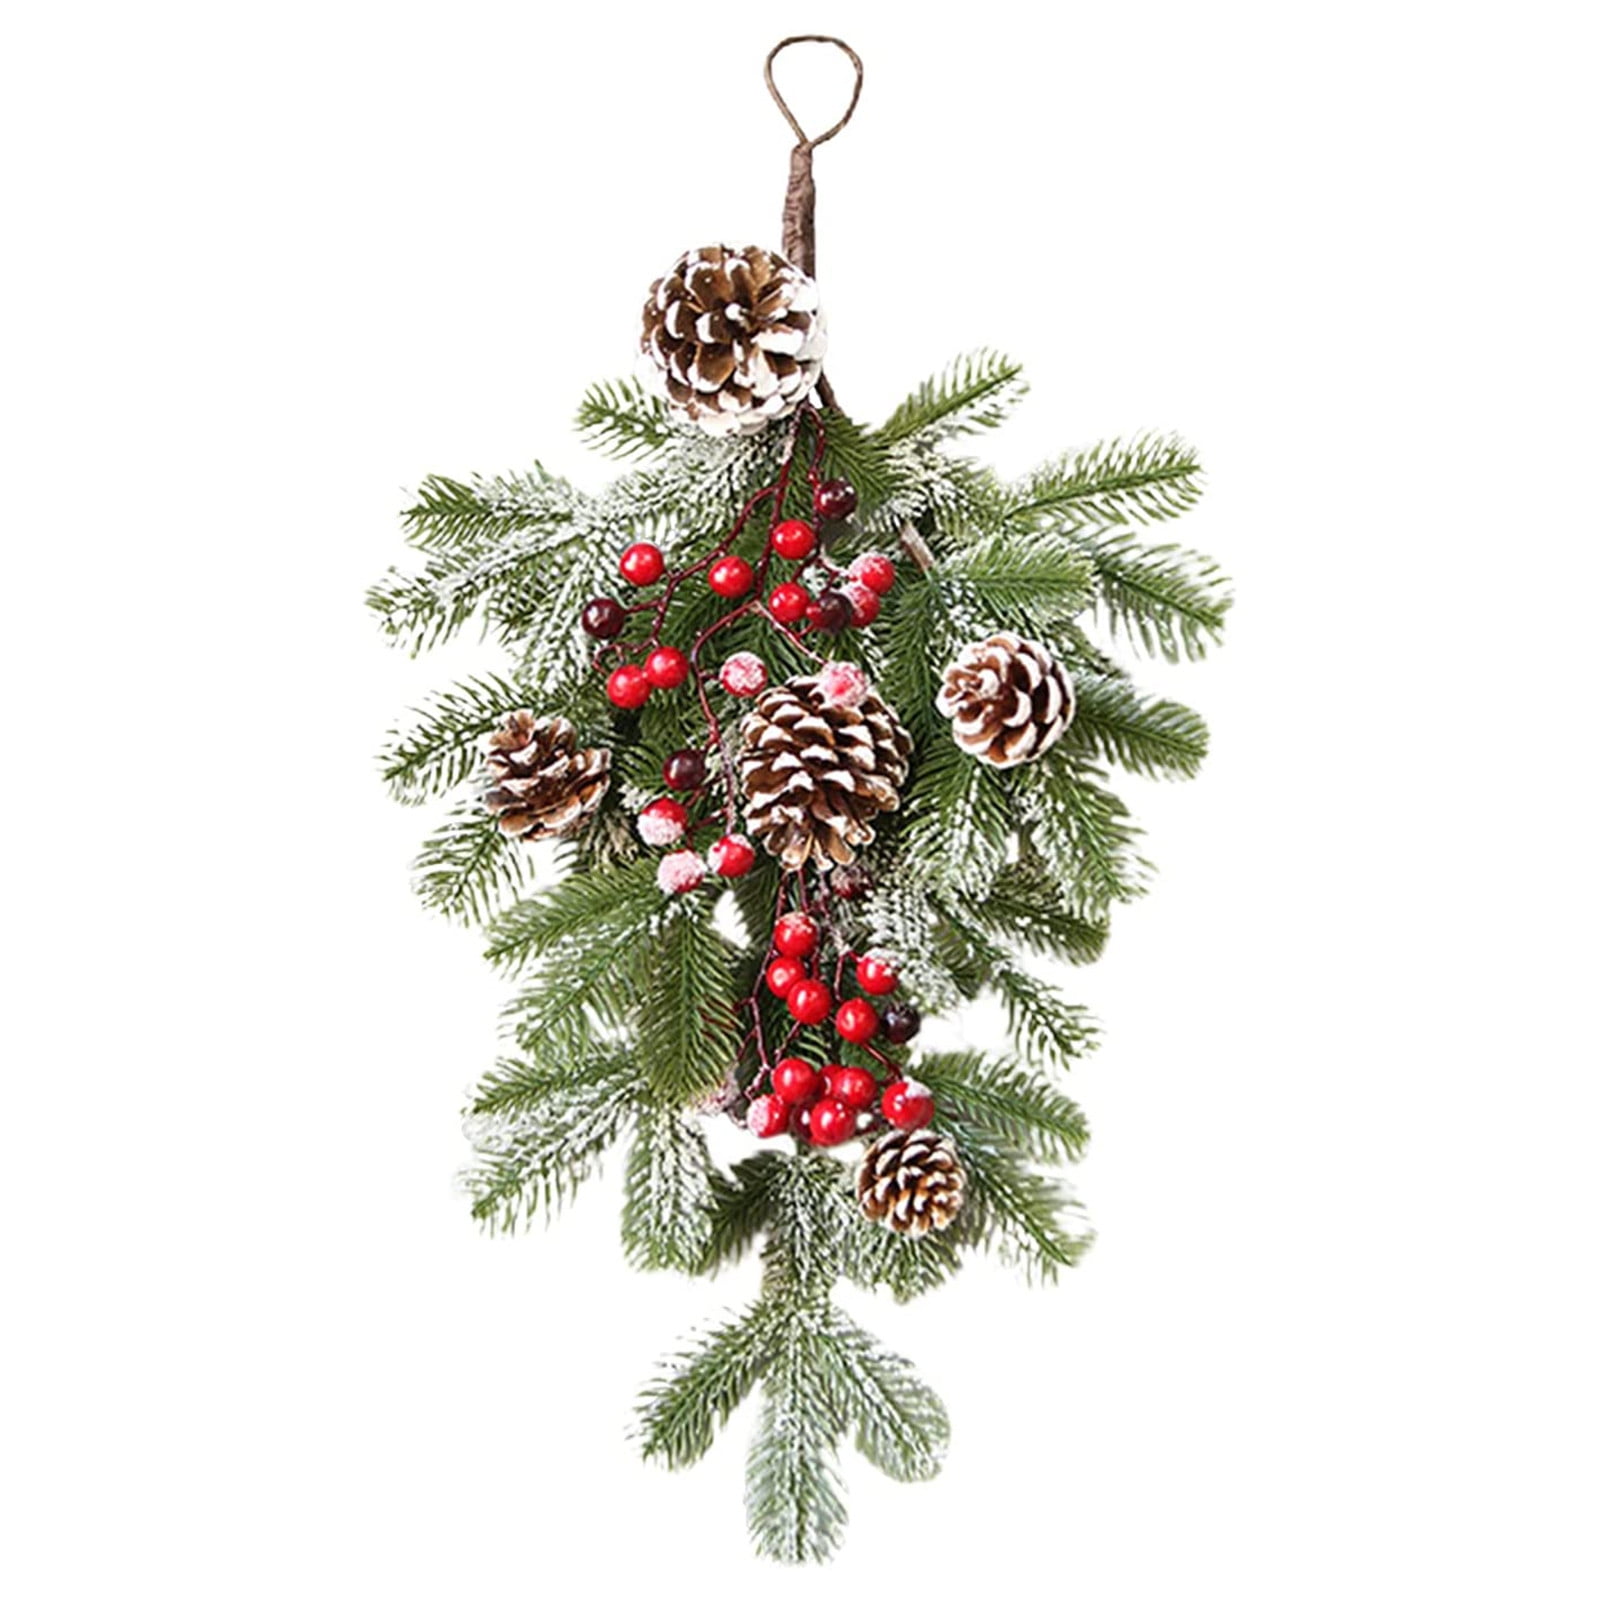 HSMQHJWE Christmas Wreaths for Front Door 21 Inch outside Artificial ...